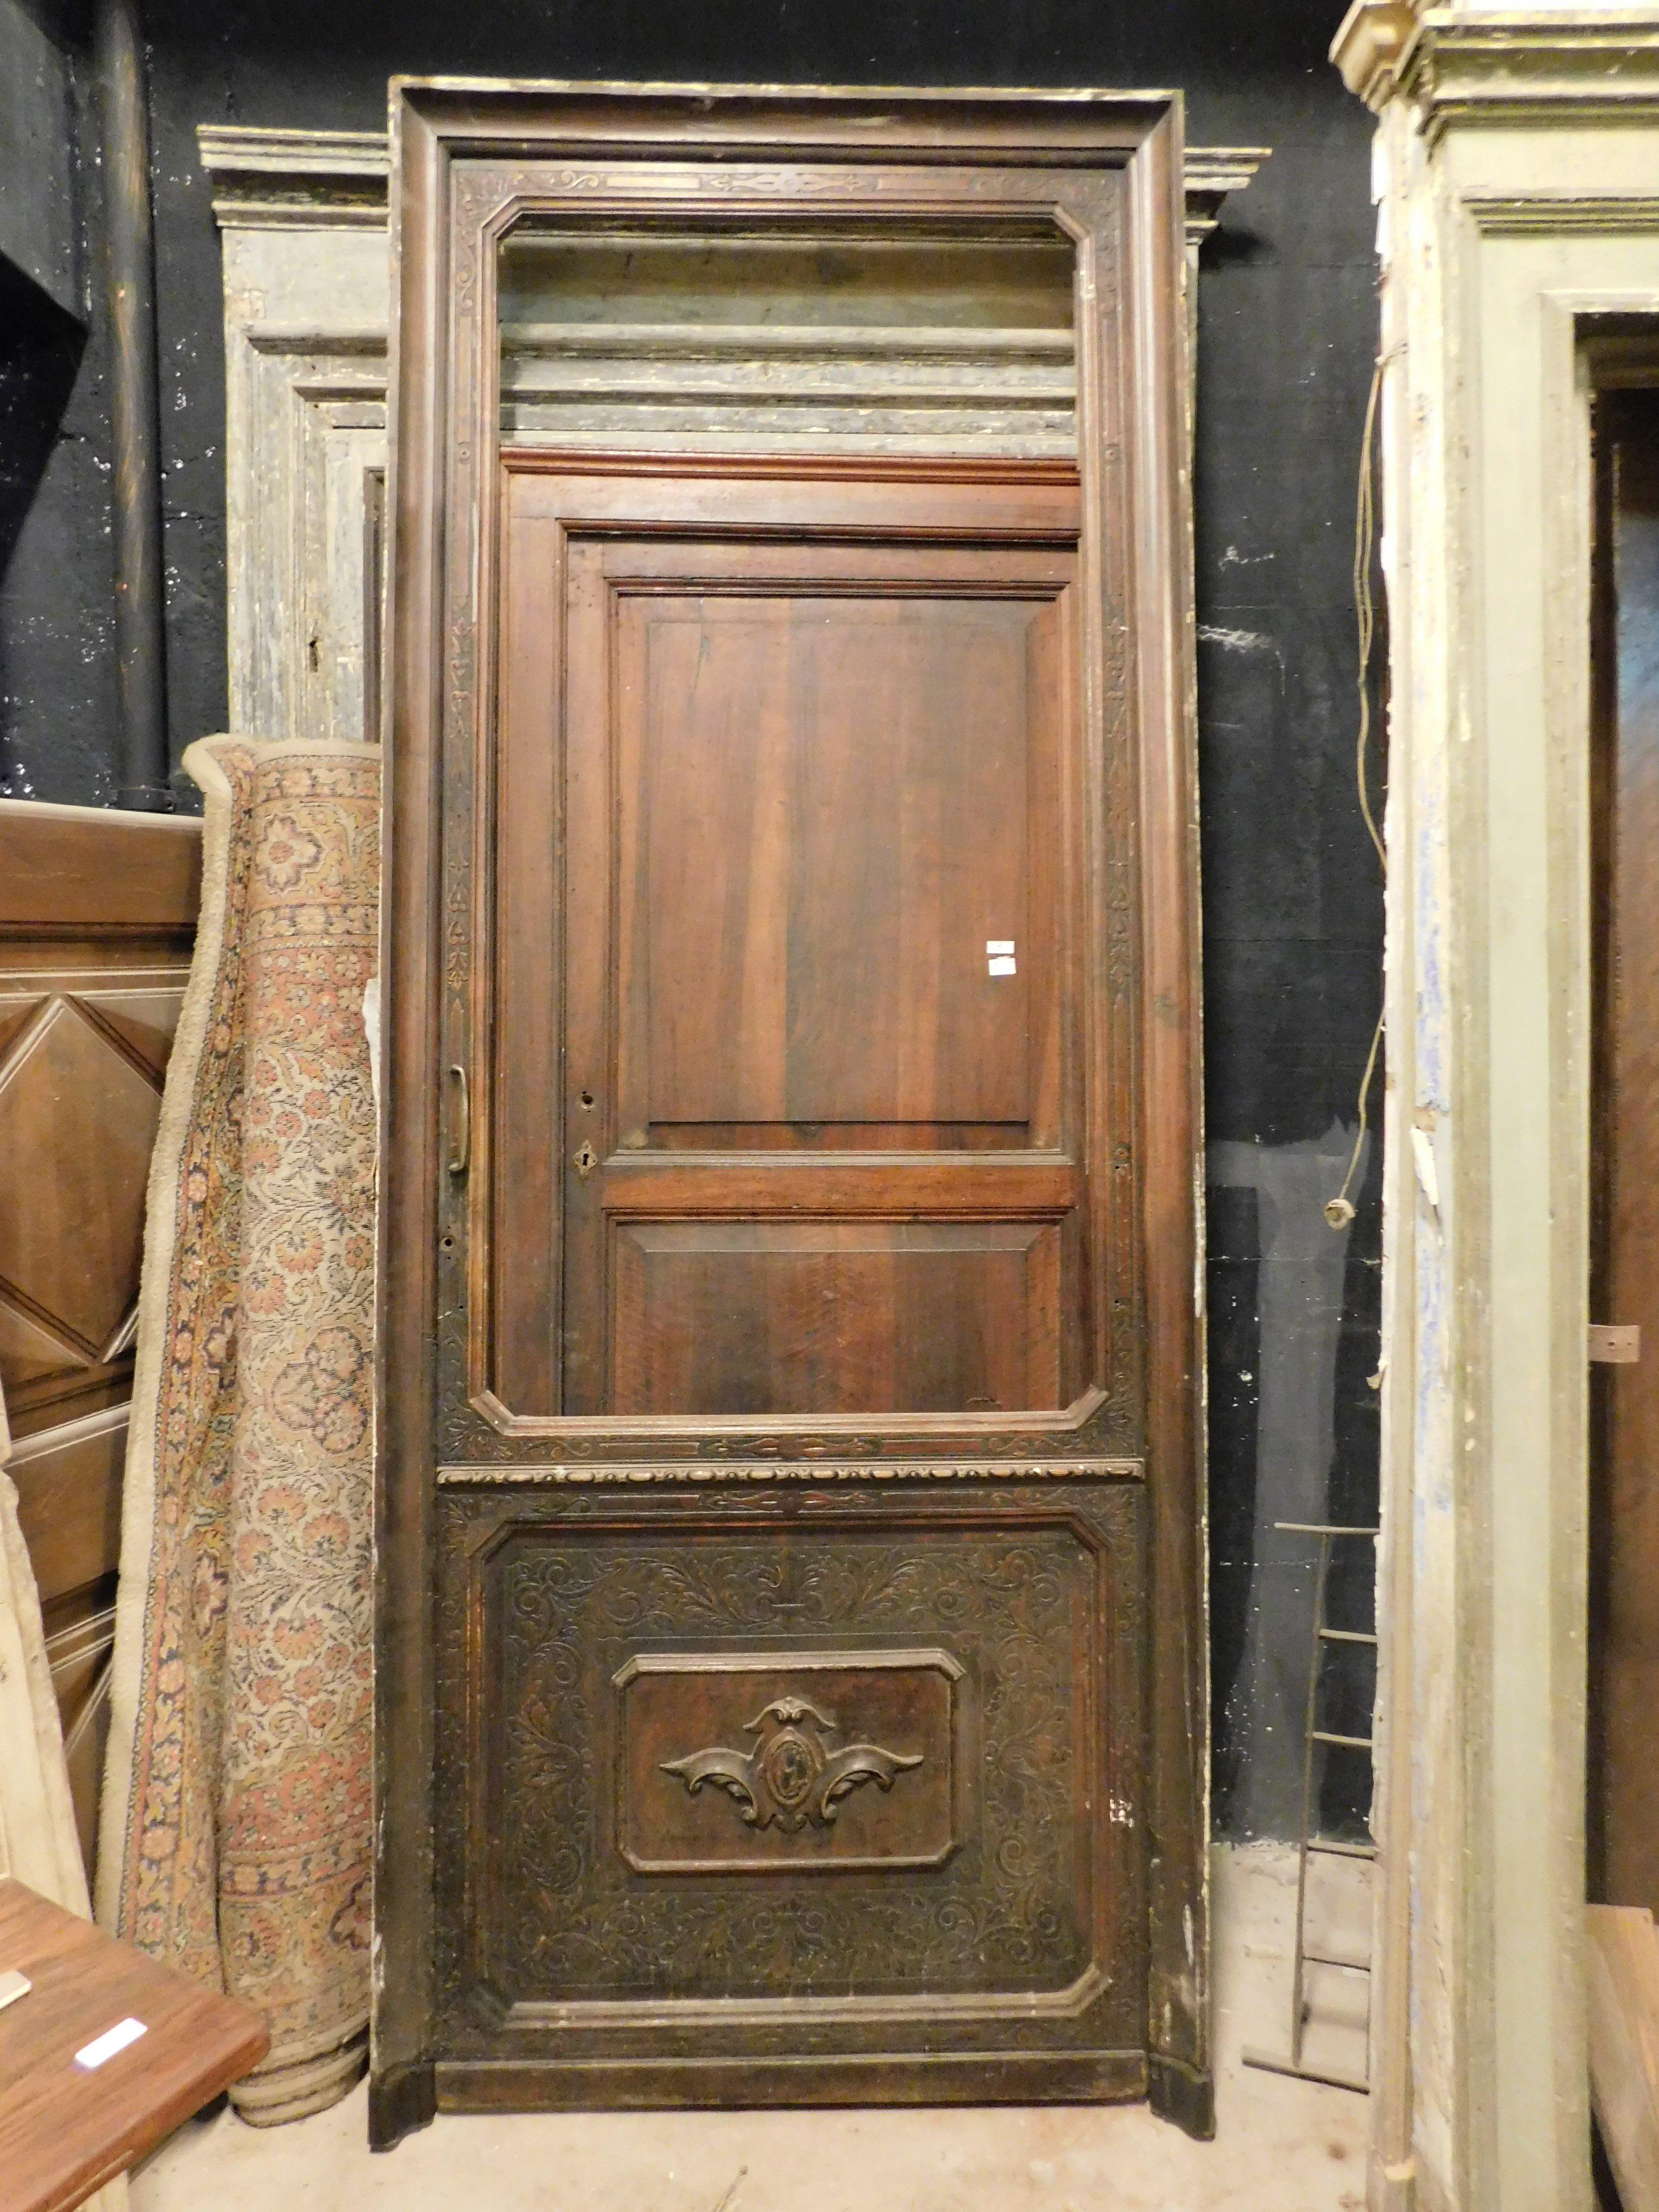 Ancient walnut shop door, historic shop front with carved panel, complete with frame and ironwork, to be reglazed and lock fixed, built in the 1800s for a venue in the historic center of Italy.
Ideal as a dividing door in environments that require